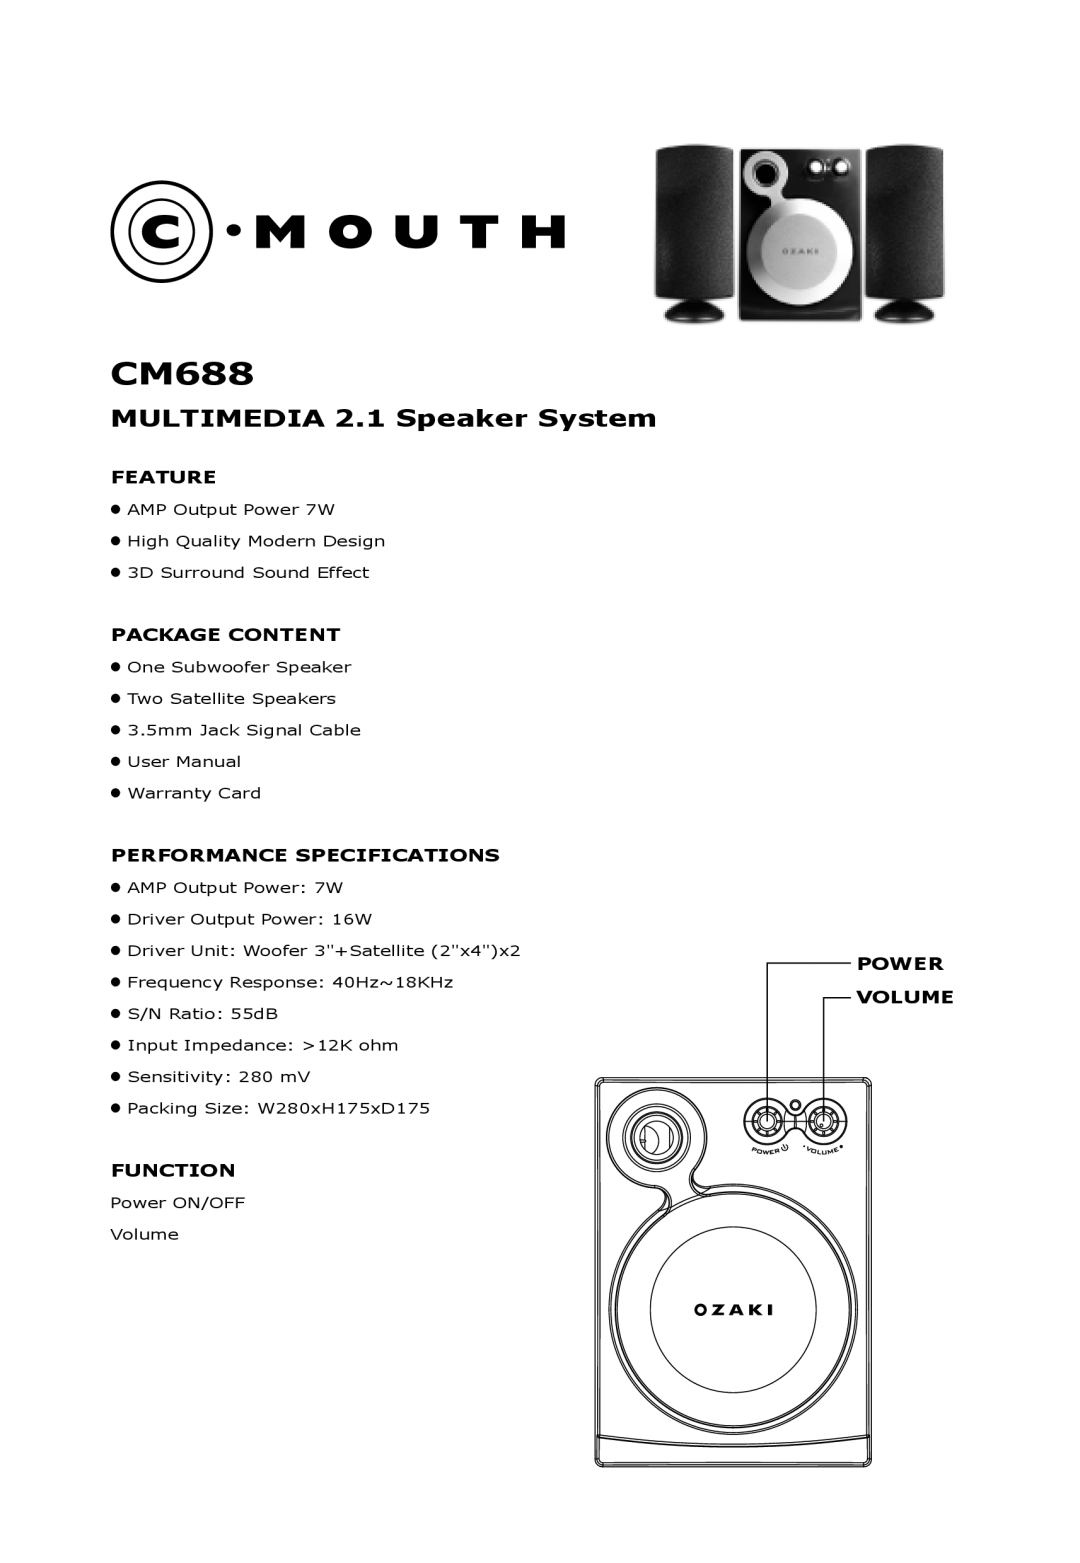 Ozaki Worldwide CM688 manual MULTIMEDIA 2.1 Speaker System, Feature, Package Content, Performance Specifications, Function 